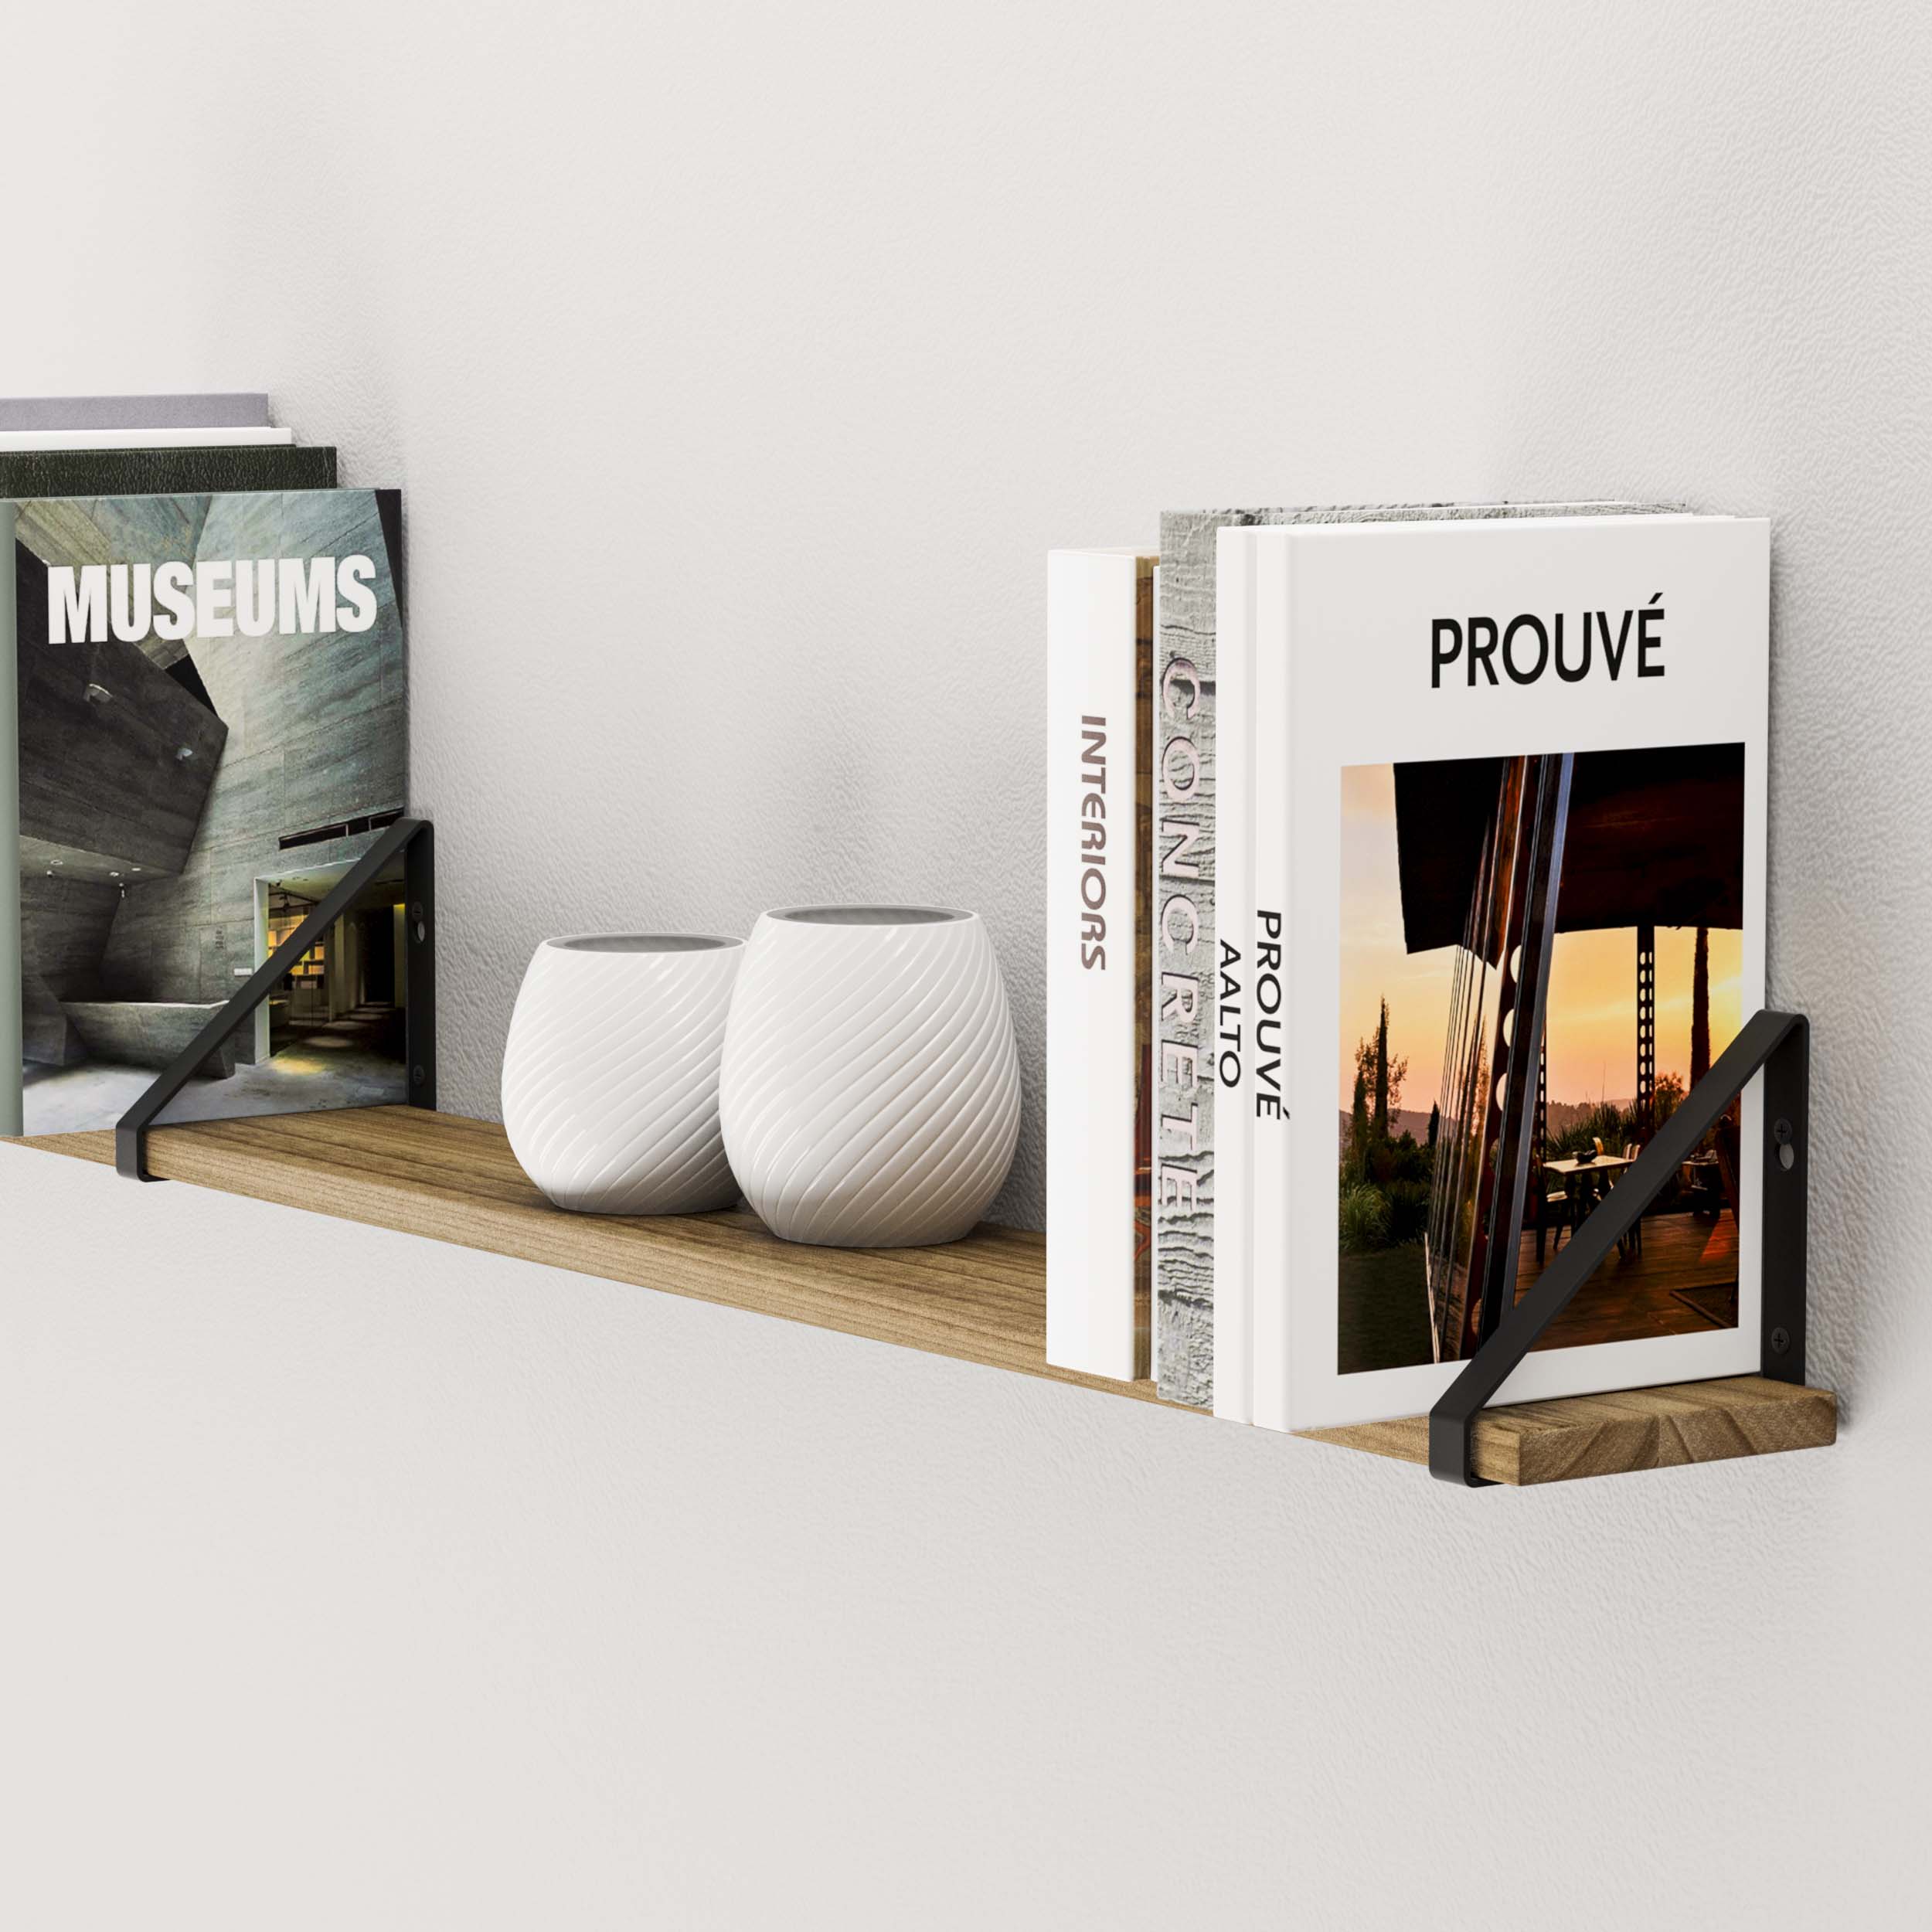 Close-up of a wooden shelf displaying art and design books alongside textured white vases, creating a minimalist aesthetic.